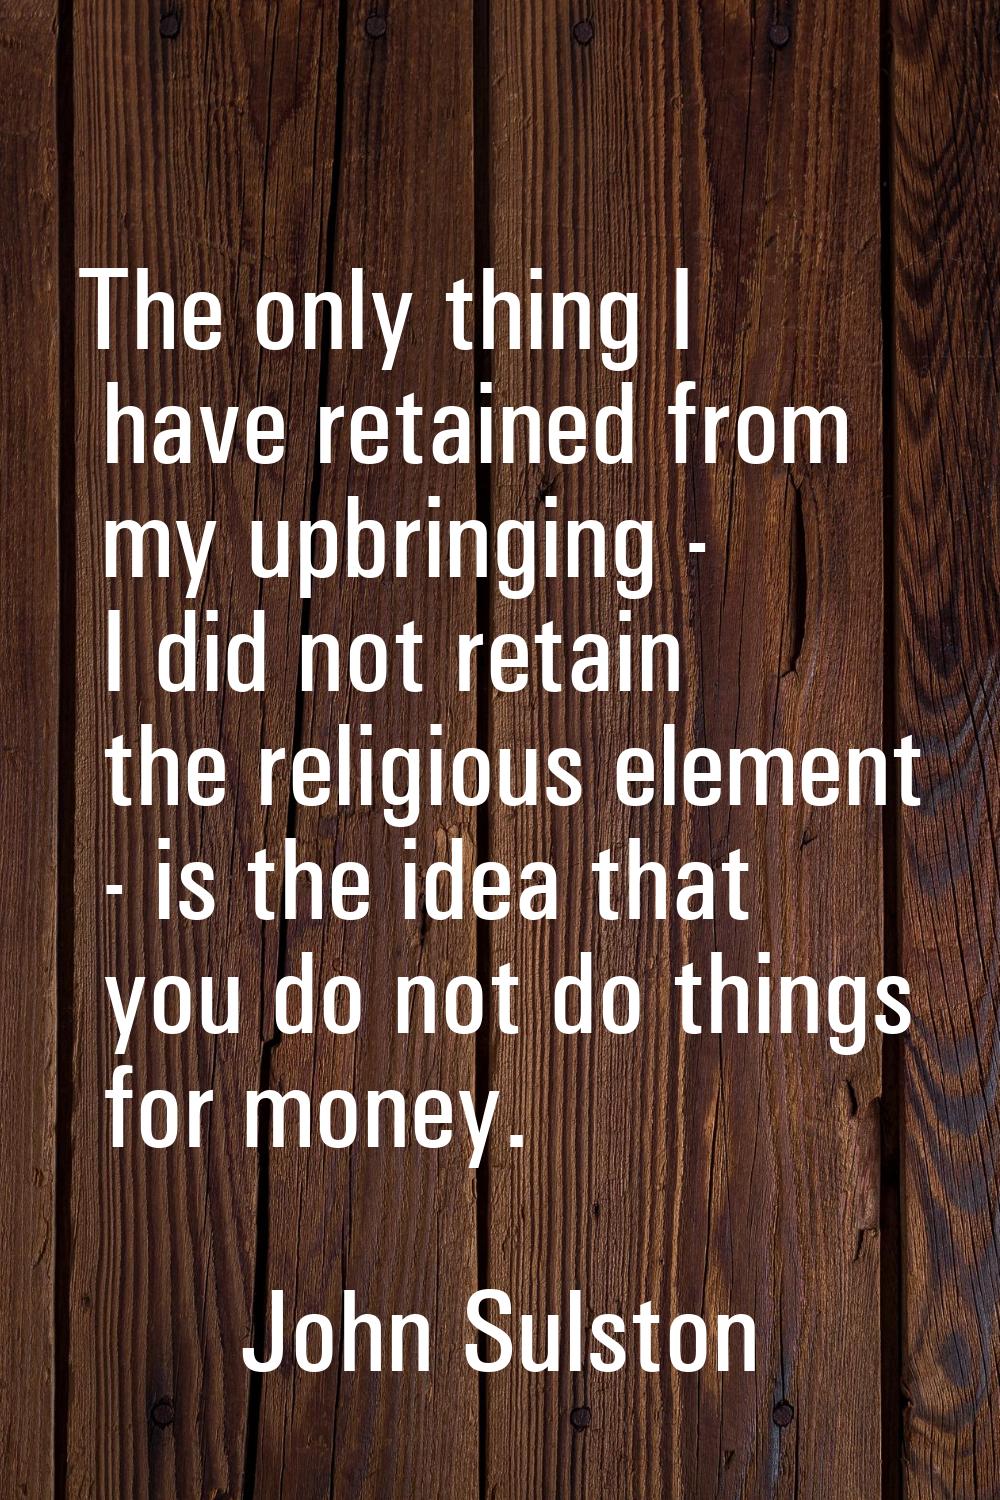 The only thing I have retained from my upbringing - I did not retain the religious element - is the